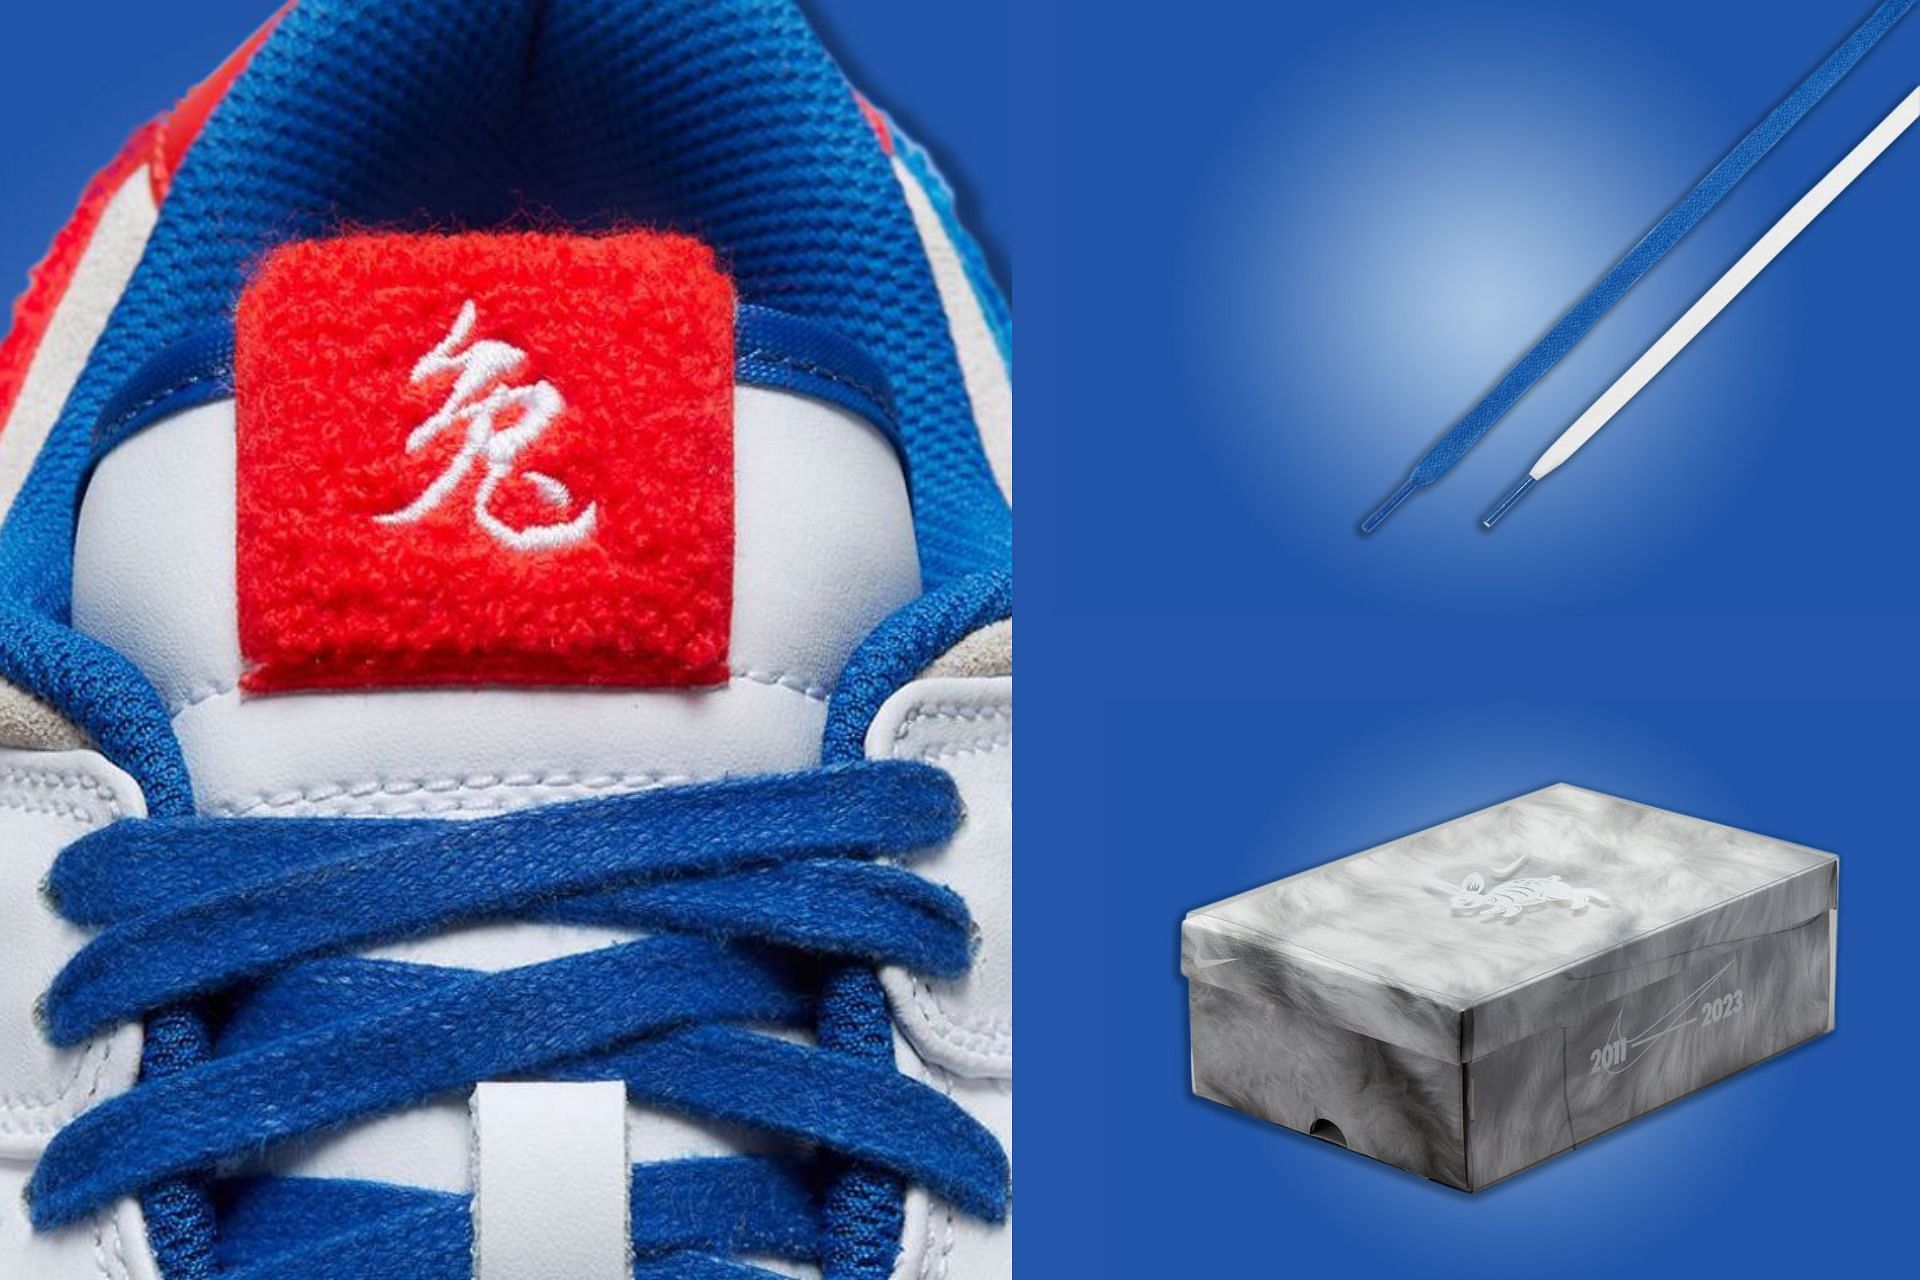 Take a closer look at the tongue section, lace sets, and customized shoe box of the shoe (Image via Sportskeeda)